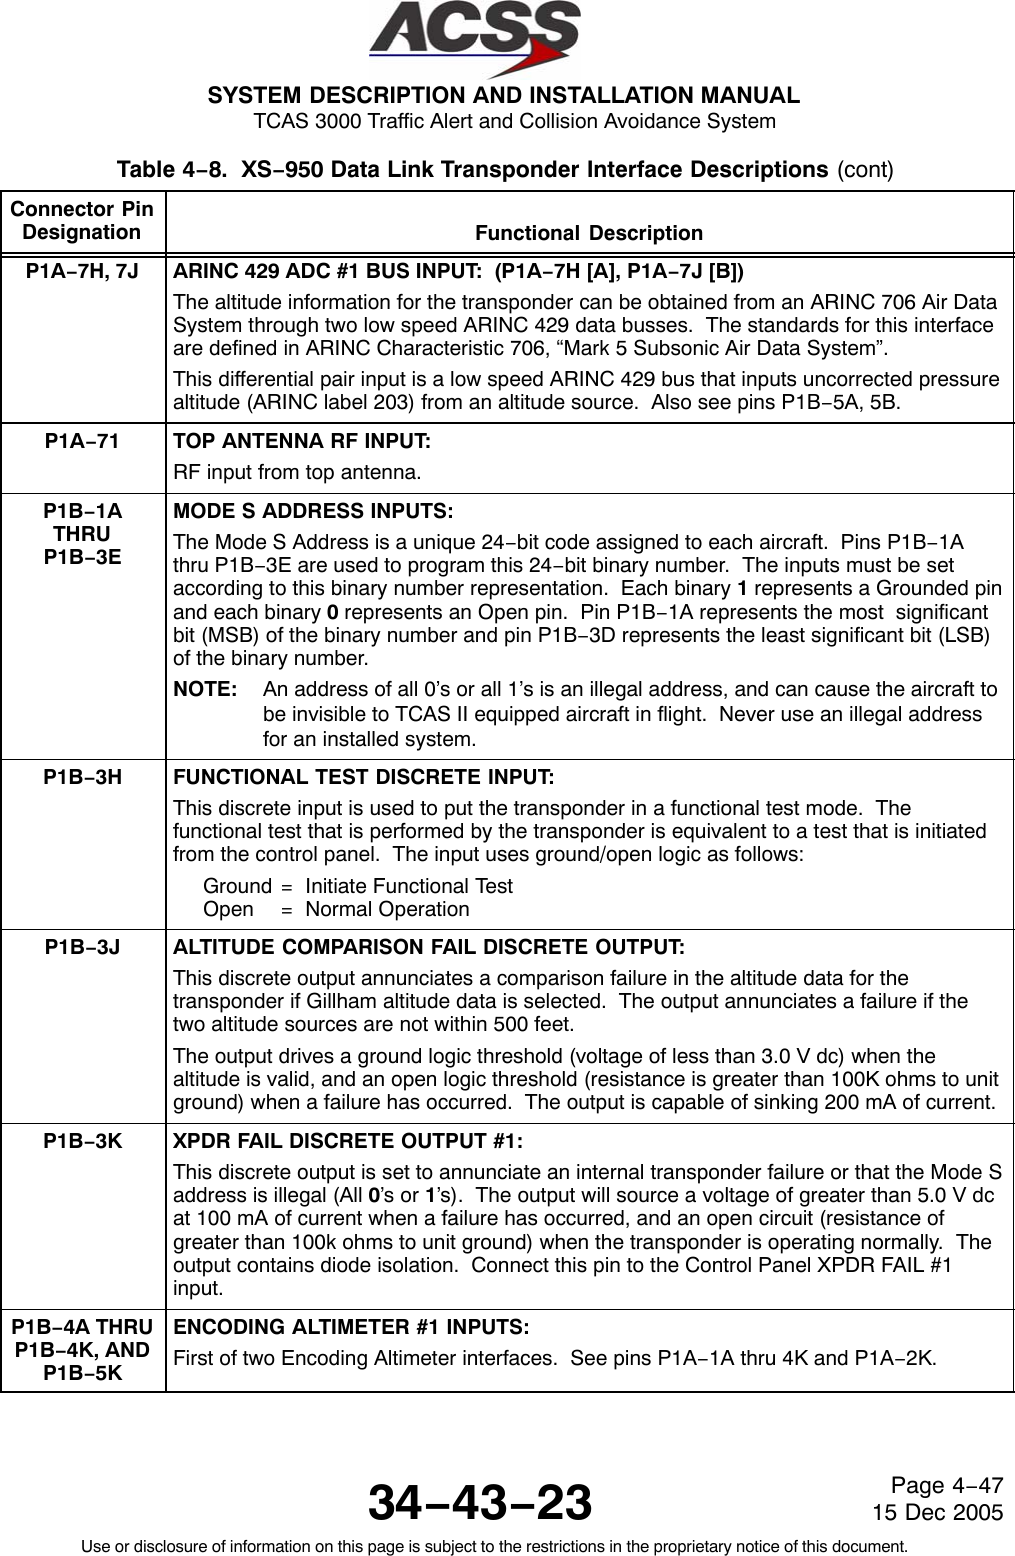 SYSTEM DESCRIPTION AND INSTALLATION MANUAL TCAS 3000 Traffic Alert and Collision Avoidance System34−43−23Use or disclosure of information on this page is subject to the restrictions in the proprietary notice of this document.Page 4−4715 Dec 2005Table 4−8.  XS−950 Data Link Transponder Interface Descriptions (cont)Connector PinDesignation Functional DescriptionP1A−7H, 7J ARINC 429 ADC #1 BUS INPUT:  (P1A−7H [A], P1A−7J [B])The altitude information for the transponder can be obtained from an ARINC 706 Air DataSystem through two low speed ARINC 429 data busses.  The standards for this interfaceare defined in ARINC Characteristic 706, “Mark 5 Subsonic Air Data System”.This differential pair input is a low speed ARINC 429 bus that inputs uncorrected pressurealtitude (ARINC label 203) from an altitude source.  Also see pins P1B−5A, 5B.P1A−71 TOP ANTENNA RF INPUT:RF input from top antenna.P1B−1ATHRUP1B−3EMODE S ADDRESS INPUTS:The Mode S Address is a unique 24−bit code assigned to each aircraft.  Pins P1B−1Athru P1B−3E are used to program this 24−bit binary number.  The inputs must be setaccording to this binary number representation.  Each binary 1 represents a Grounded pinand each binary 0 represents an Open pin.  Pin P1B−1A represents the most  significantbit (MSB) of the binary number and pin P1B−3D represents the least significant bit (LSB)of the binary number.NOTE: An address of all 0’s or all 1’s is an illegal address, and can cause the aircraft tobe invisible to TCAS II equipped aircraft in flight.  Never use an illegal addressfor an installed system.P1B−3H FUNCTIONAL TEST DISCRETE INPUT:This discrete input is used to put the transponder in a functional test mode.  Thefunctional test that is performed by the transponder is equivalent to a test that is initiatedfrom the control panel.  The input uses ground/open logic as follows:Ground =  Initiate Functional TestOpen =  Normal OperationP1B−3J ALTITUDE COMPARISON FAIL DISCRETE OUTPUT:This discrete output annunciates a comparison failure in the altitude data for thetransponder if Gillham altitude data is selected.  The output annunciates a failure if thetwo altitude sources are not within 500 feet.The output drives a ground logic threshold (voltage of less than 3.0 V dc) when thealtitude is valid, and an open logic threshold (resistance is greater than 100K ohms to unitground) when a failure has occurred.  The output is capable of sinking 200 mA of current.P1B−3K XPDR FAIL DISCRETE OUTPUT #1:This discrete output is set to annunciate an internal transponder failure or that the Mode Saddress is illegal (All 0’s or 1’s).  The output will source a voltage of greater than 5.0 V dcat 100 mA of current when a failure has occurred, and an open circuit (resistance ofgreater than 100k ohms to unit ground) when the transponder is operating normally.  Theoutput contains diode isolation.  Connect this pin to the Control Panel XPDR FAIL #1input.P1B−4A THRUP1B−4K, ANDP1B−5KENCODING ALTIMETER #1 INPUTS:First of two Encoding Altimeter interfaces.  See pins P1A−1A thru 4K and P1A−2K.